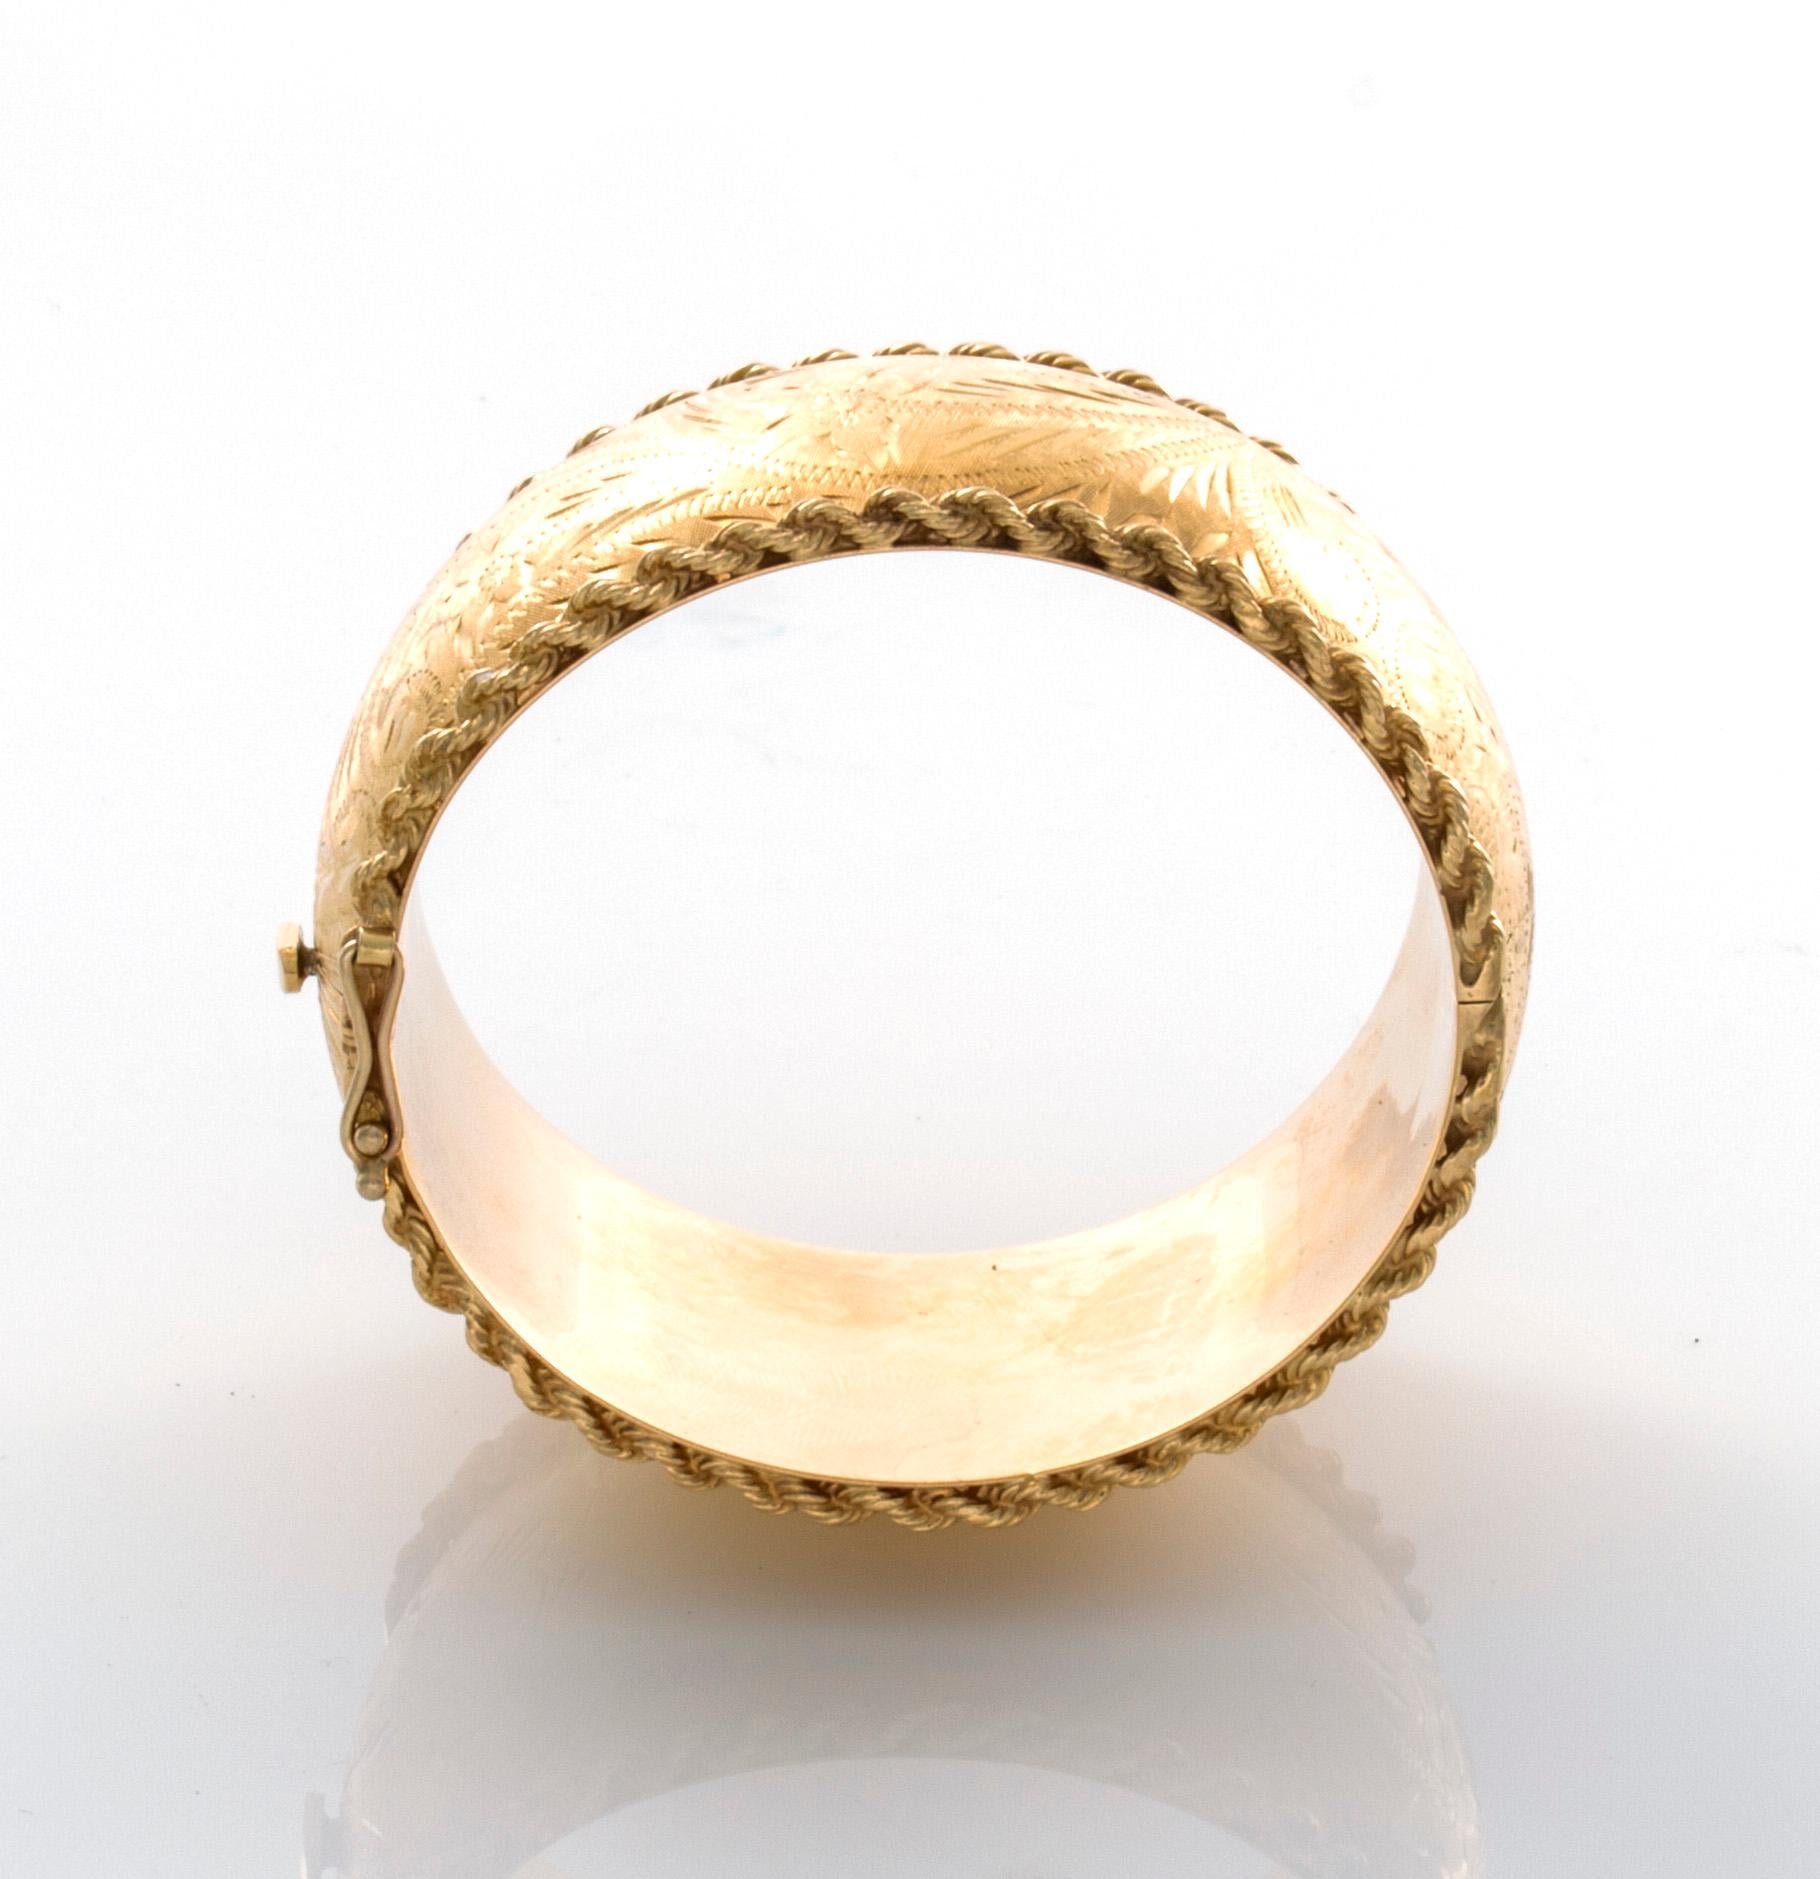 The bracelet is hand crafted in 14 Karat Yellow Gold etched on the outside convex area and flat gold on the inside of the bracelet. There is also a gold rope attached to the top and bottom border of the bracelet. It should fit a 6.75